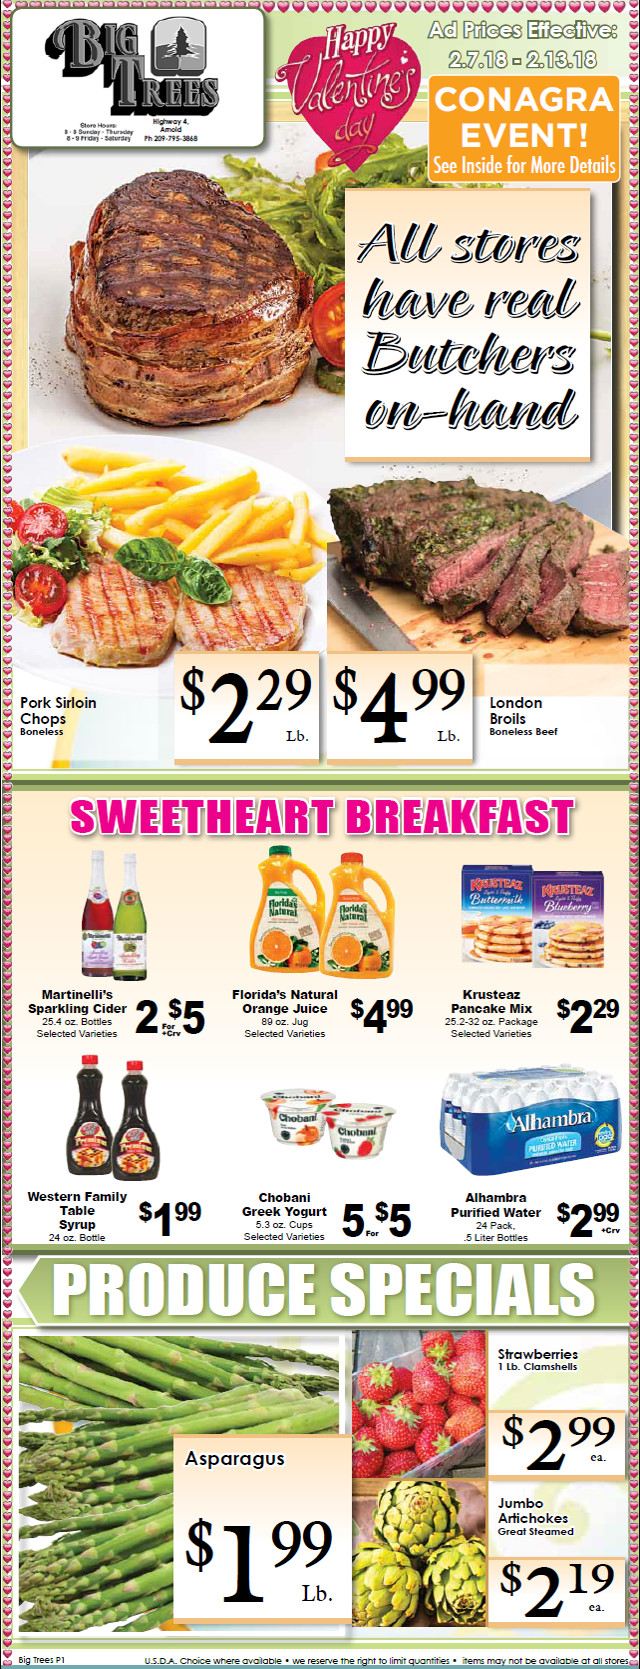 Big Trees Market Weekly Ad & Specials Through February 13th